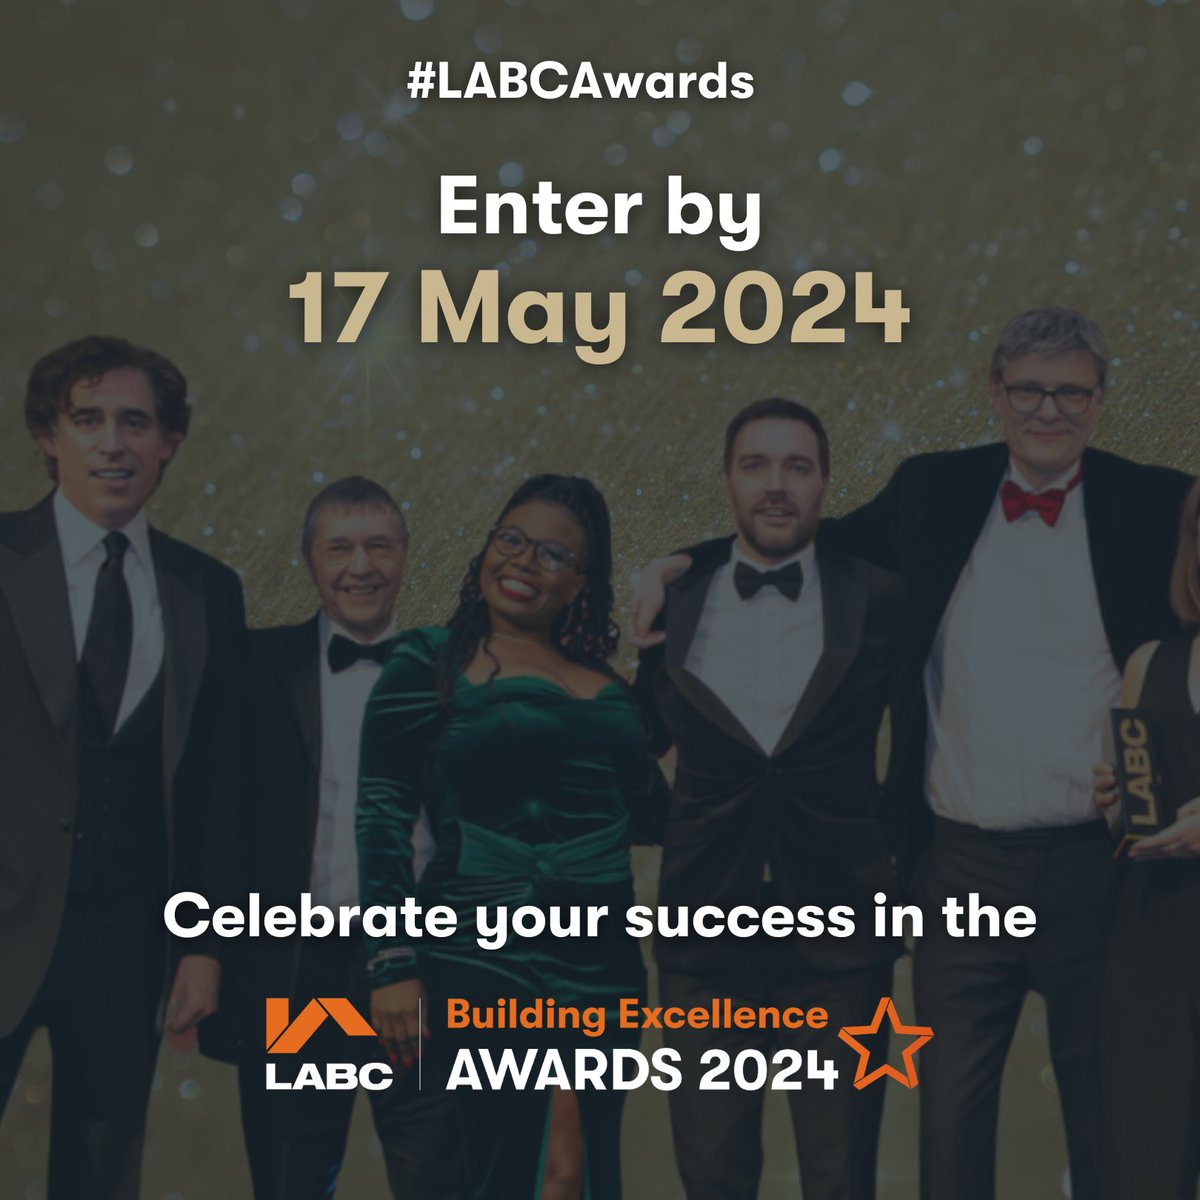 It’s time to celebrate the achievements within our industry at the #LABCAwards! The deadline to complete all entries is 17 May. More info on categories and how to enter: ow.ly/1Obz50R4xBk #construction #labcawards